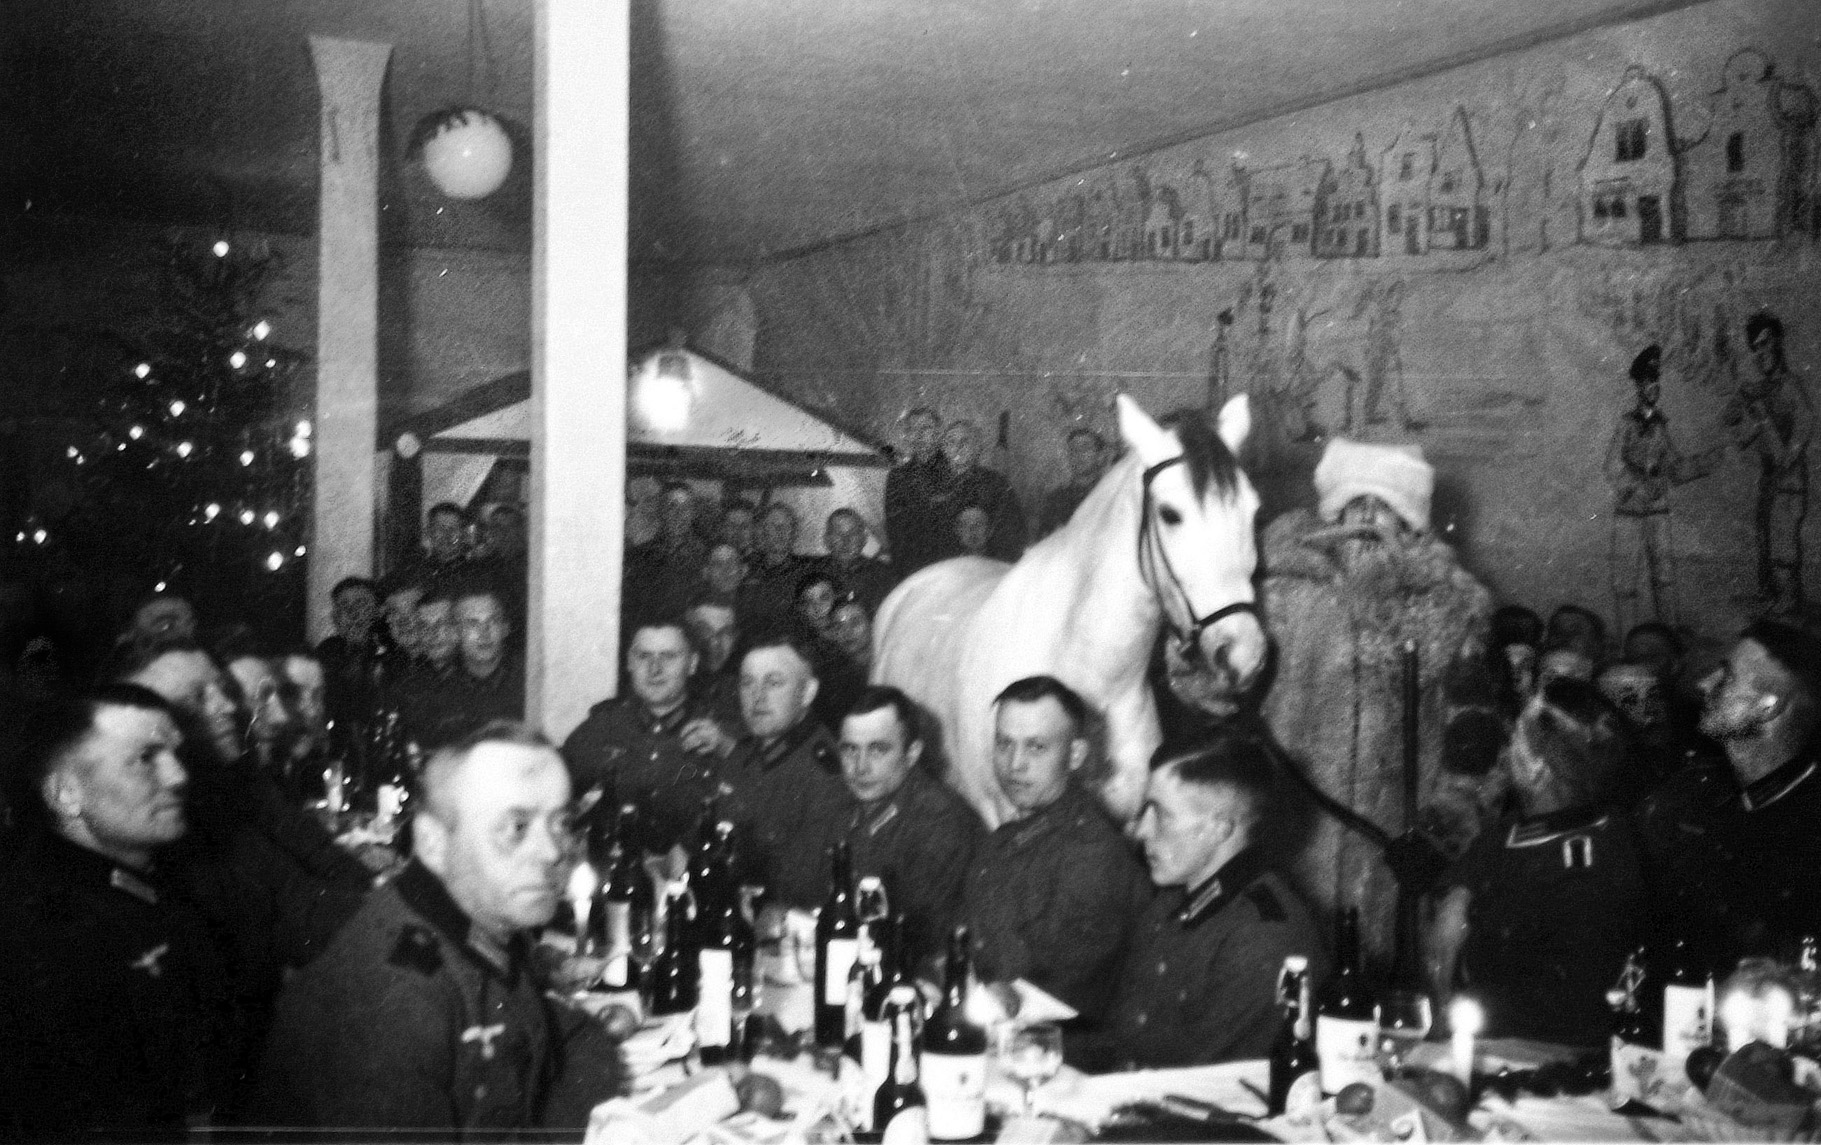 Although the faces of the soldiers appear less than festive, Father Christmas (standing, right) has brought his horse to a holiday dinner party, the table laden with bottles of wine, beer, and liquor, the walls decorated with the soldiers’ artwork. Preparing for war in 1939 the German military counted some 2,740,000 men in uniform, 183,000 motor vehicles, 94,000 motorcycles, and 514,000 horses.